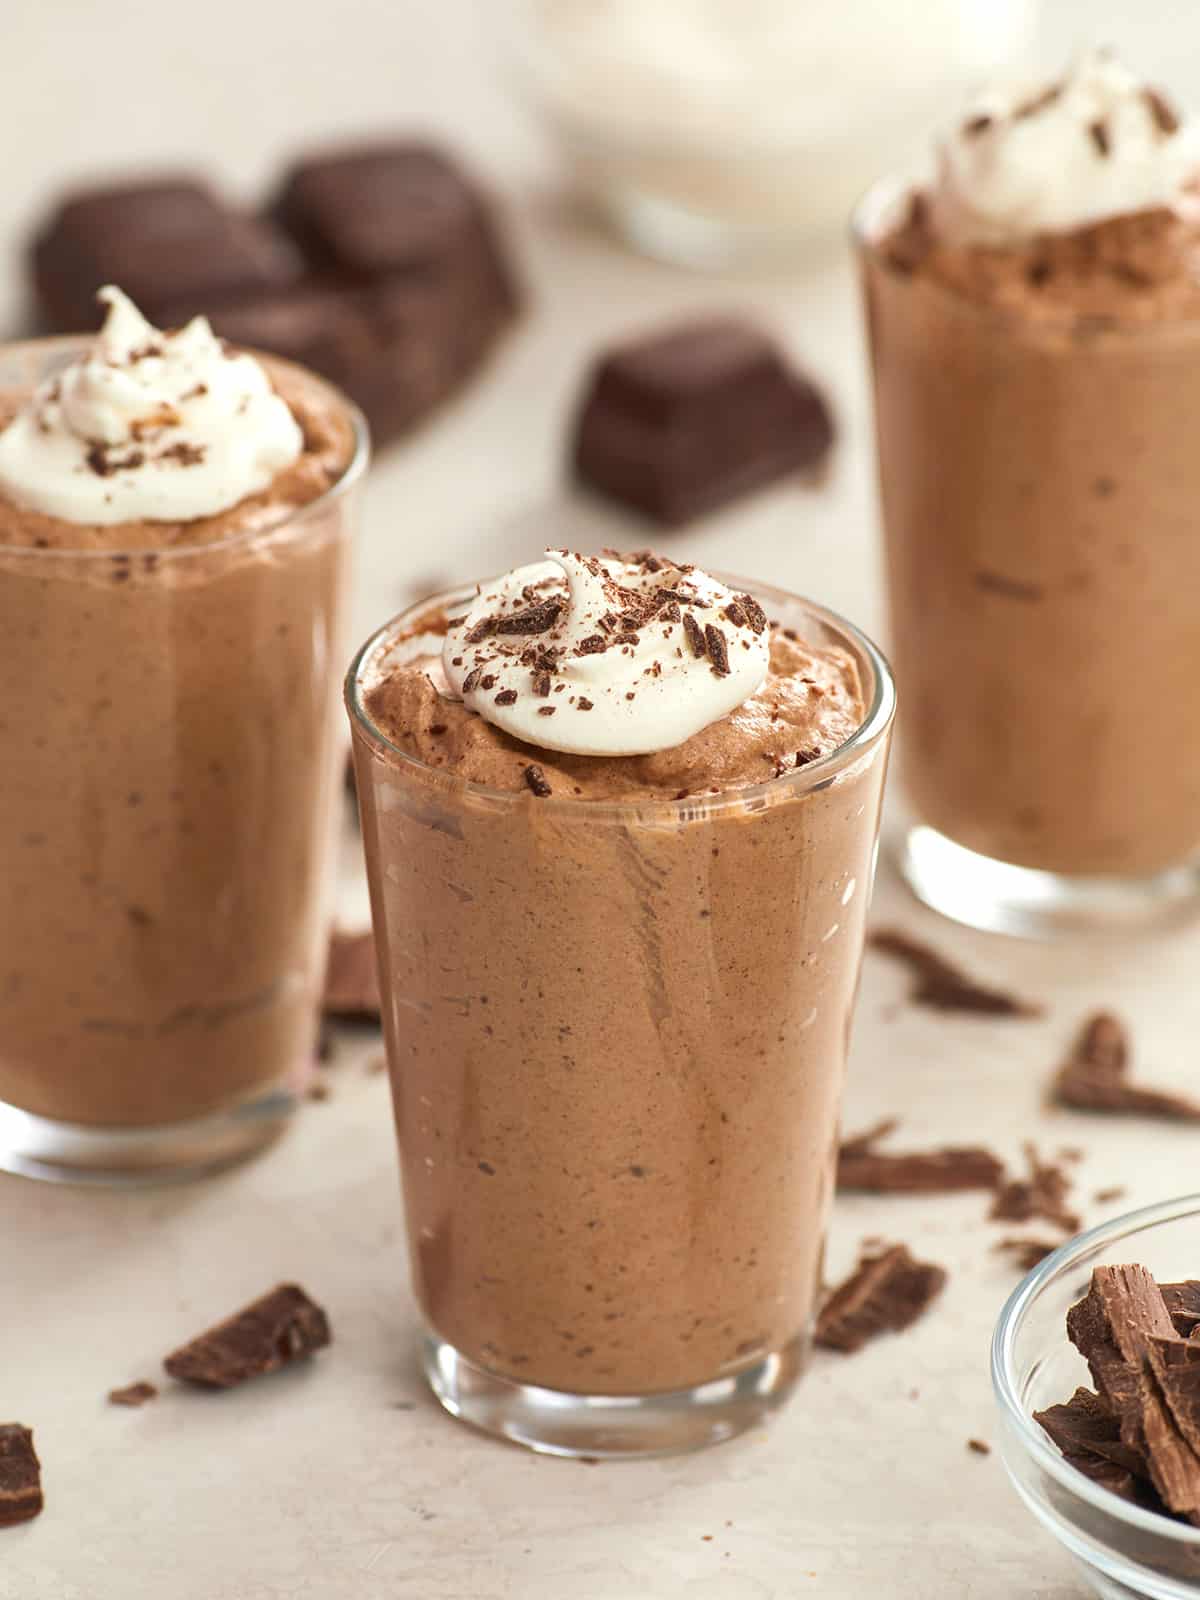 Three cups full of chocolate mousse with whipped cream.